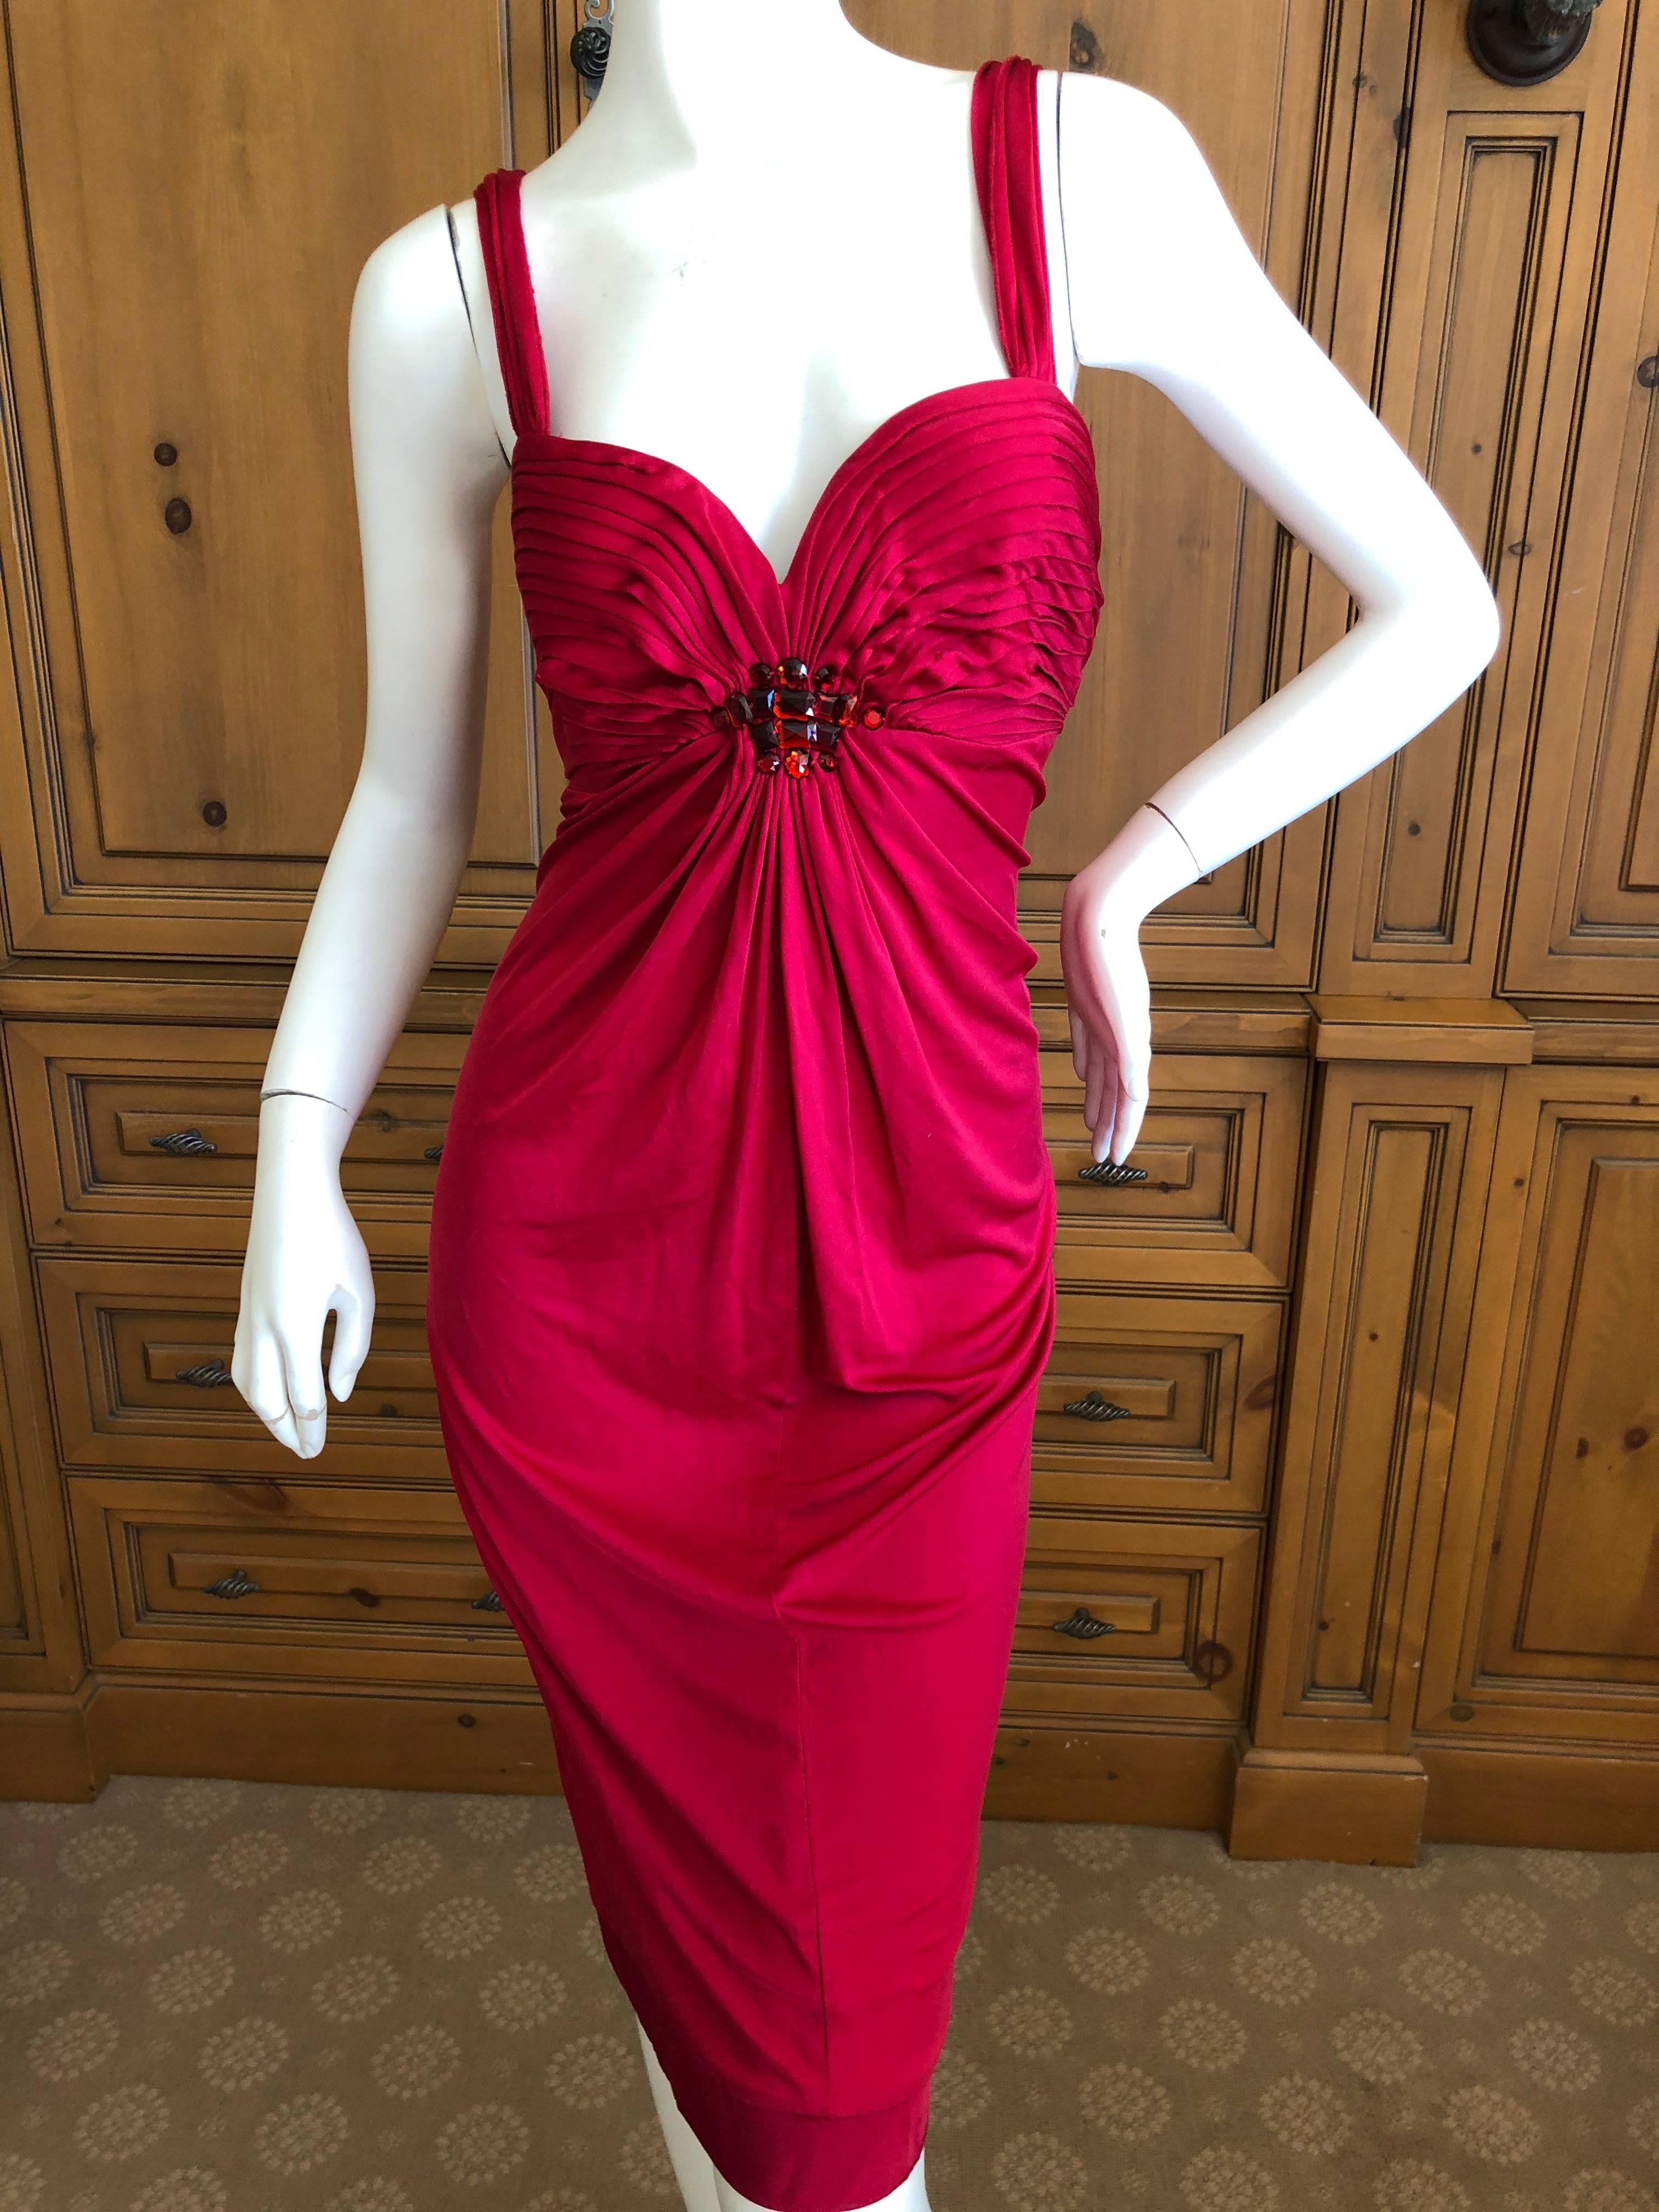 Christian Dior Crystal Embellished Red Cocktail Dress .
Lined in silk, the dress is made of viscose acetate blend.
Size 40
 Bust 34